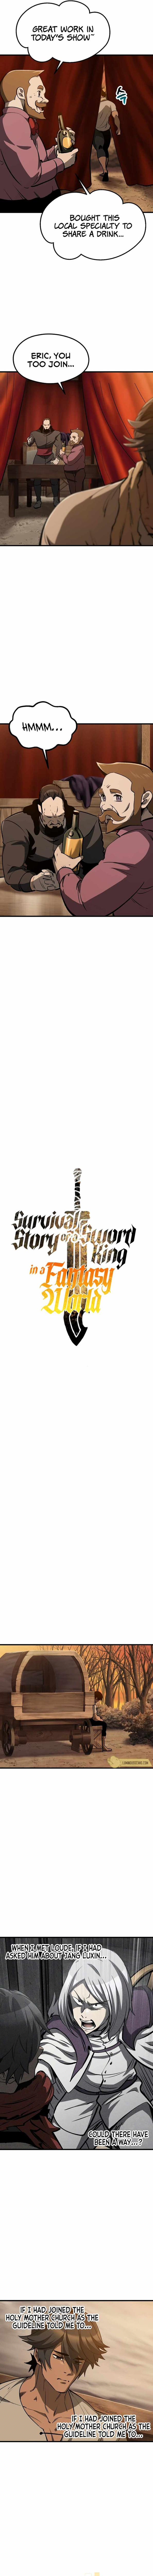 Survival Story Of A Sword King In A Fantasy World 190 8